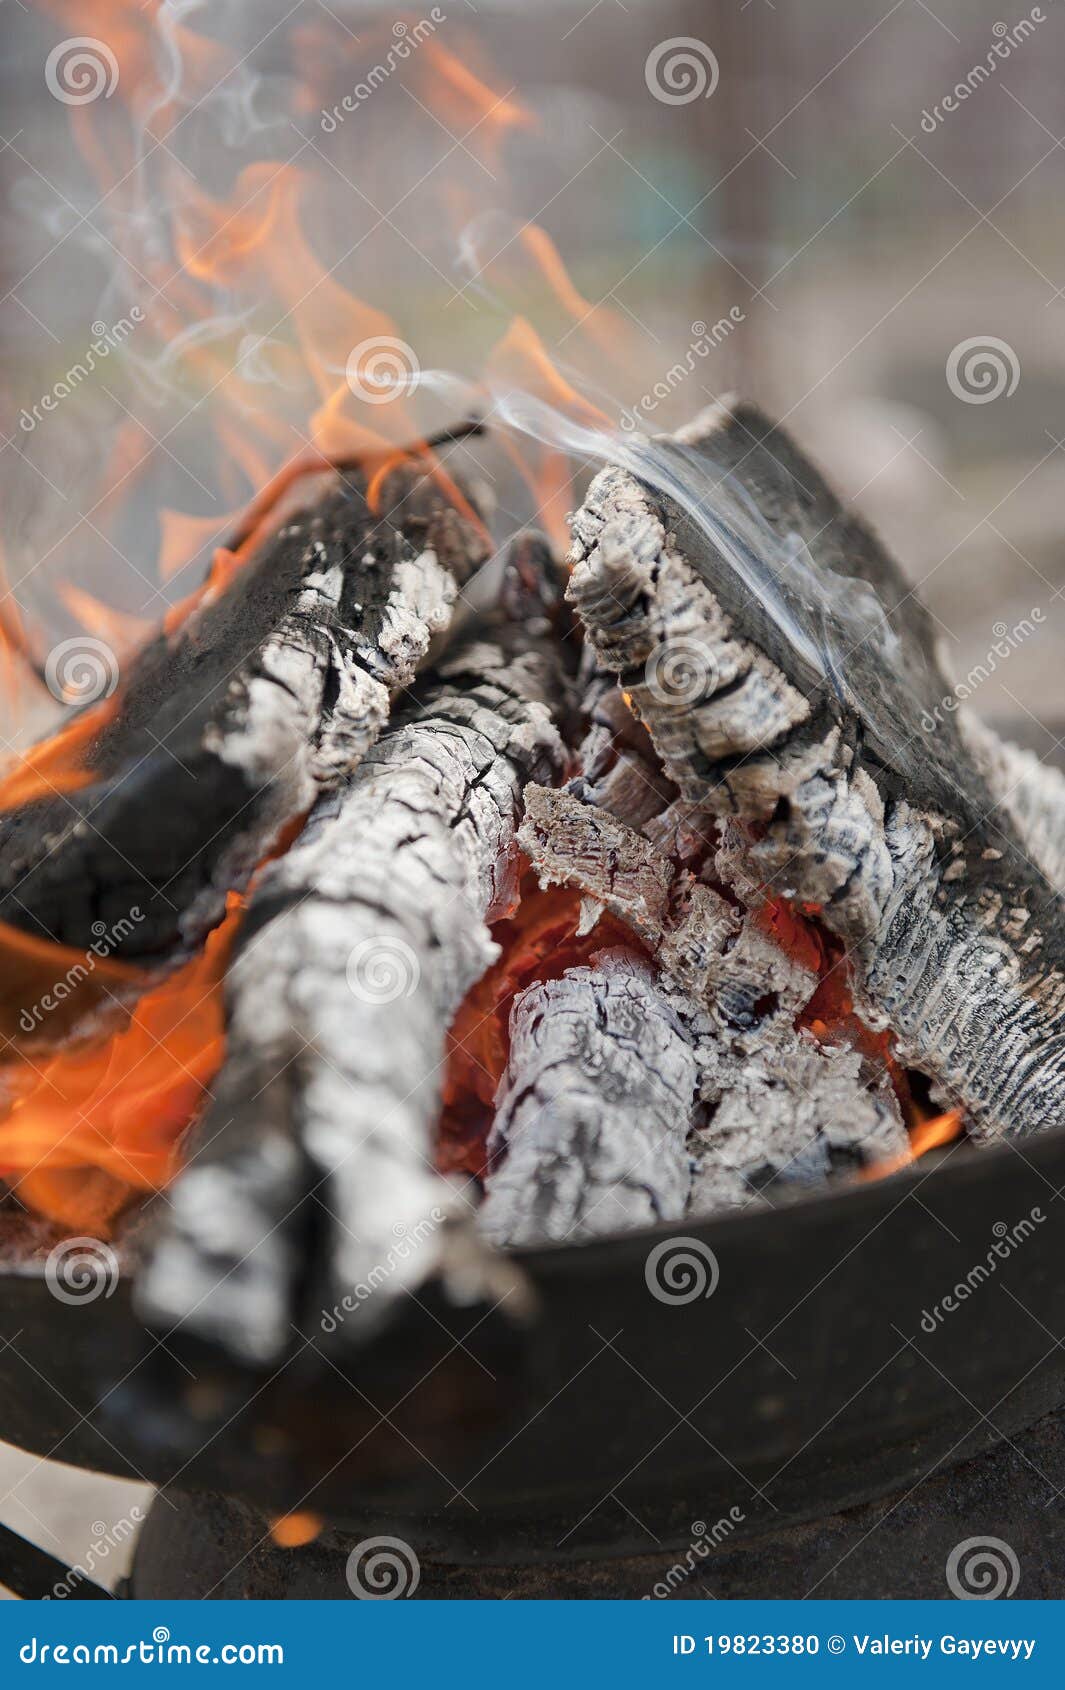 Burning coal in brazier stock photo. Image of nature - 19823380